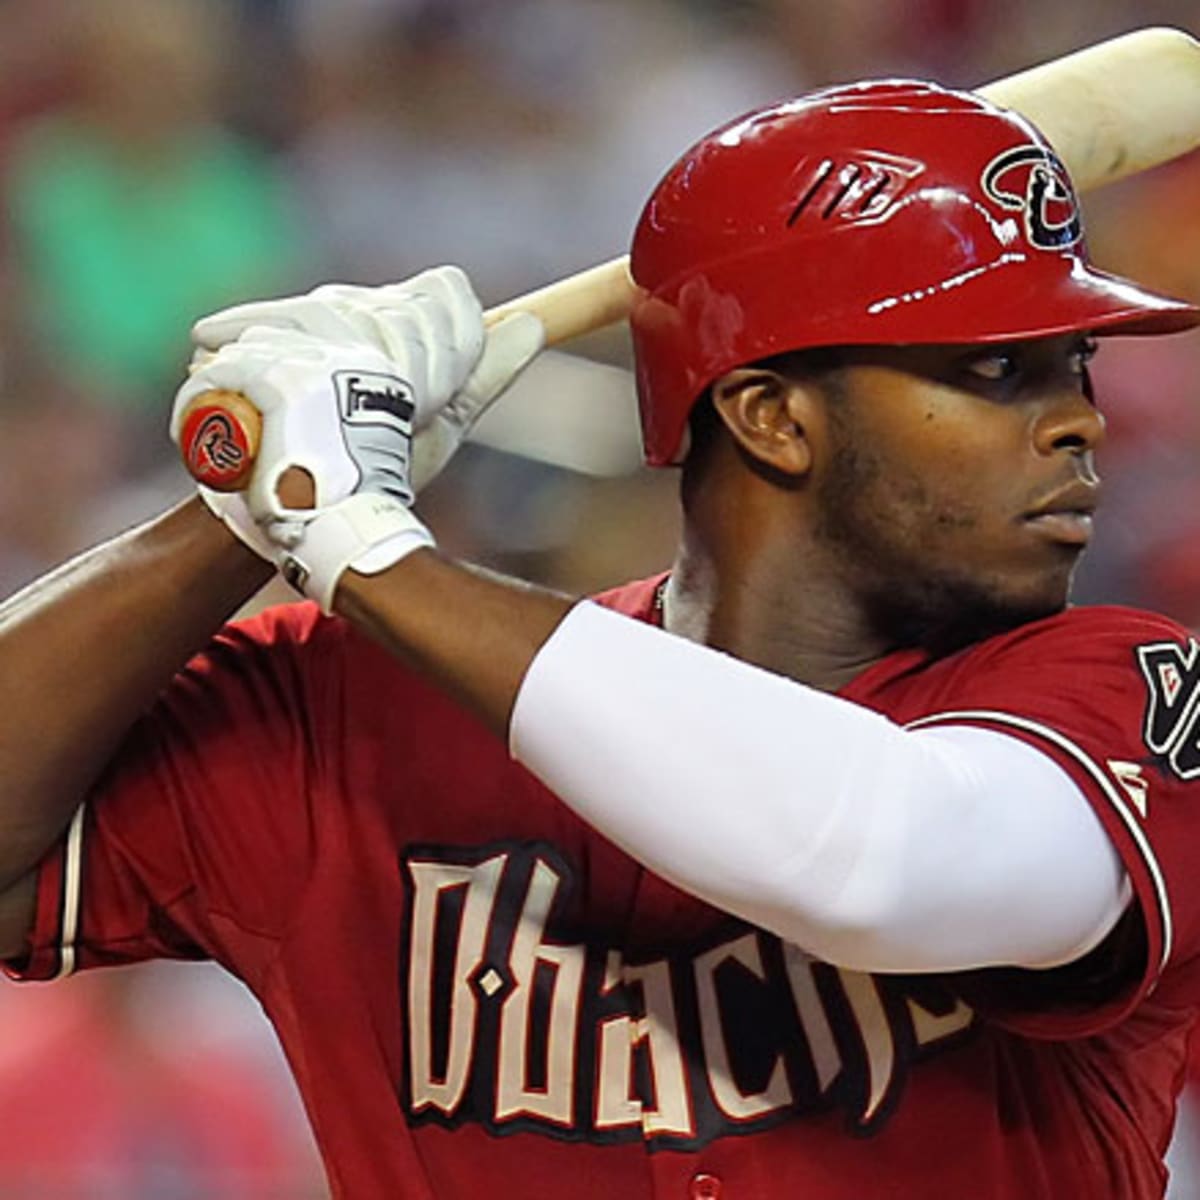 Rays' B.J. Upton agrees to 5-year, $75 million deal with Atlanta